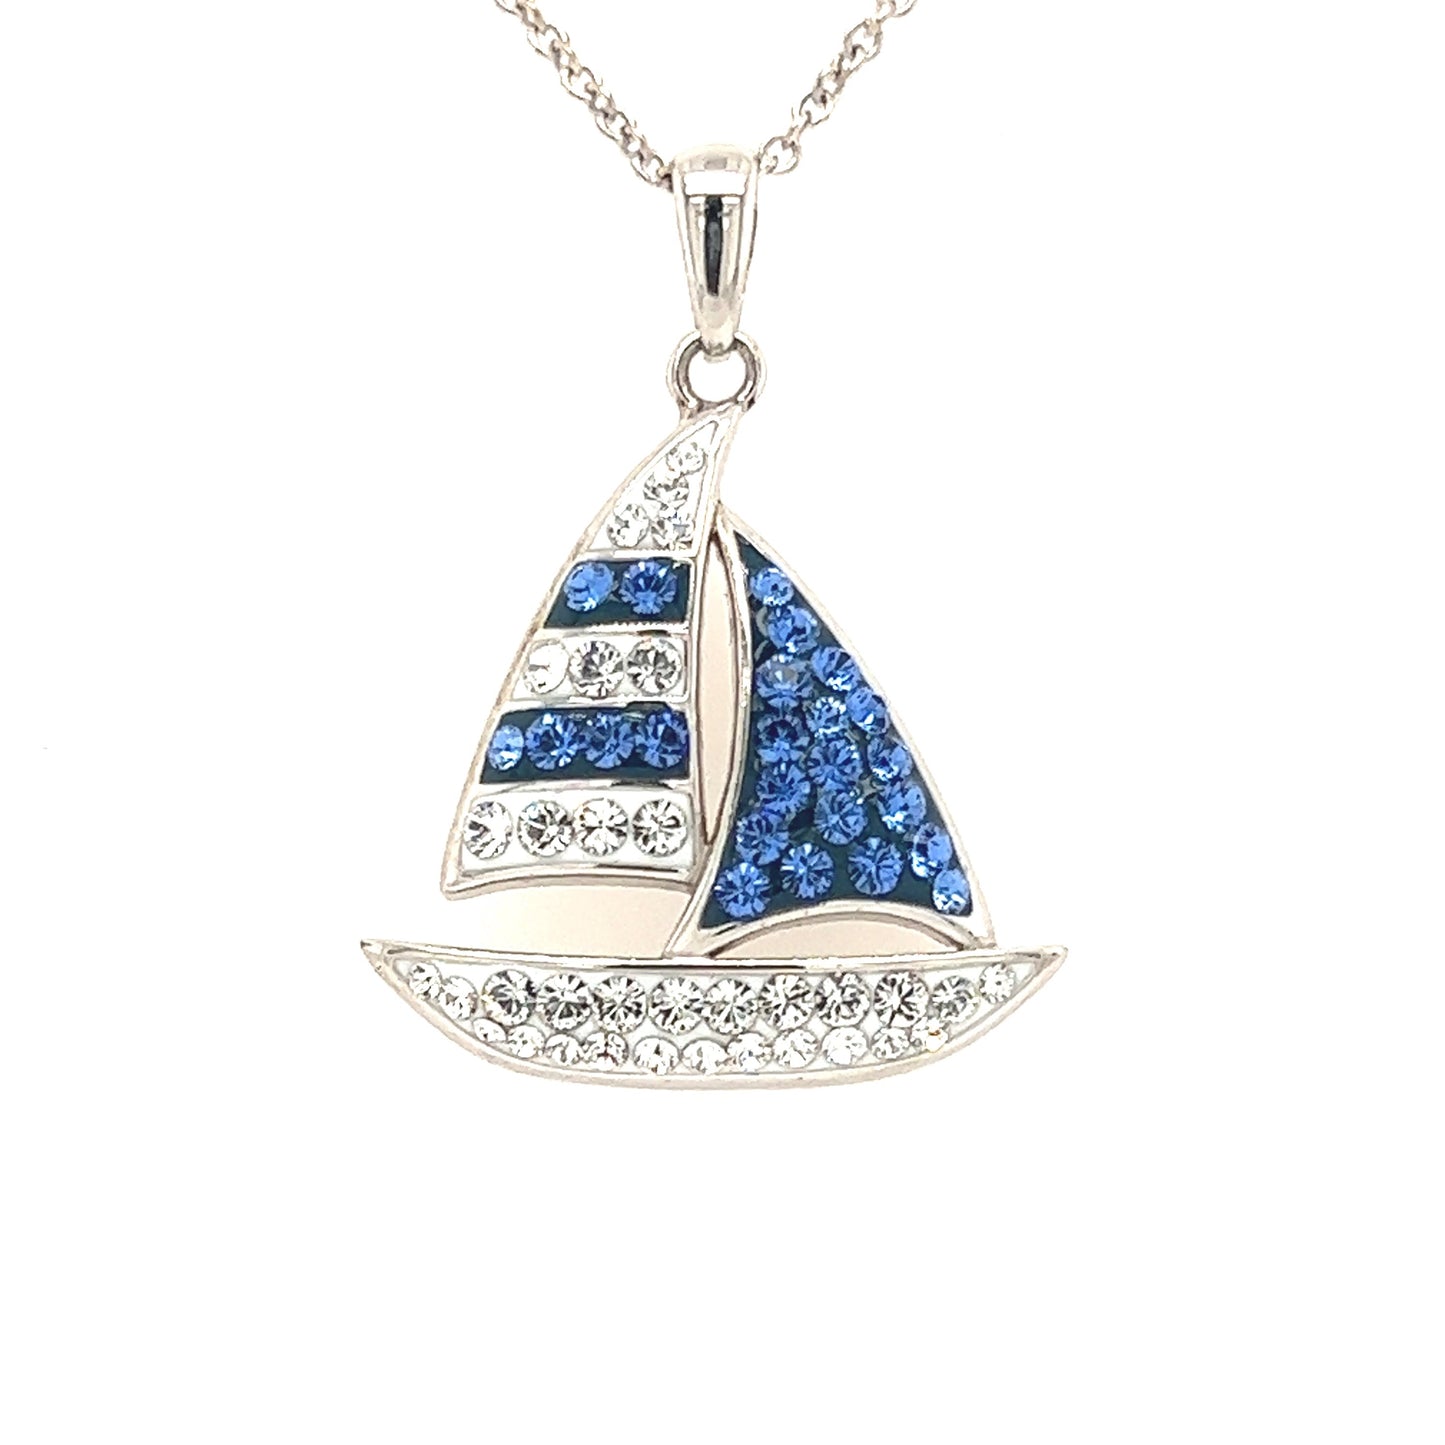 Blue Sailboat Necklace with Blue and White Crystals in Sterling Silver. Pendant Zoom View